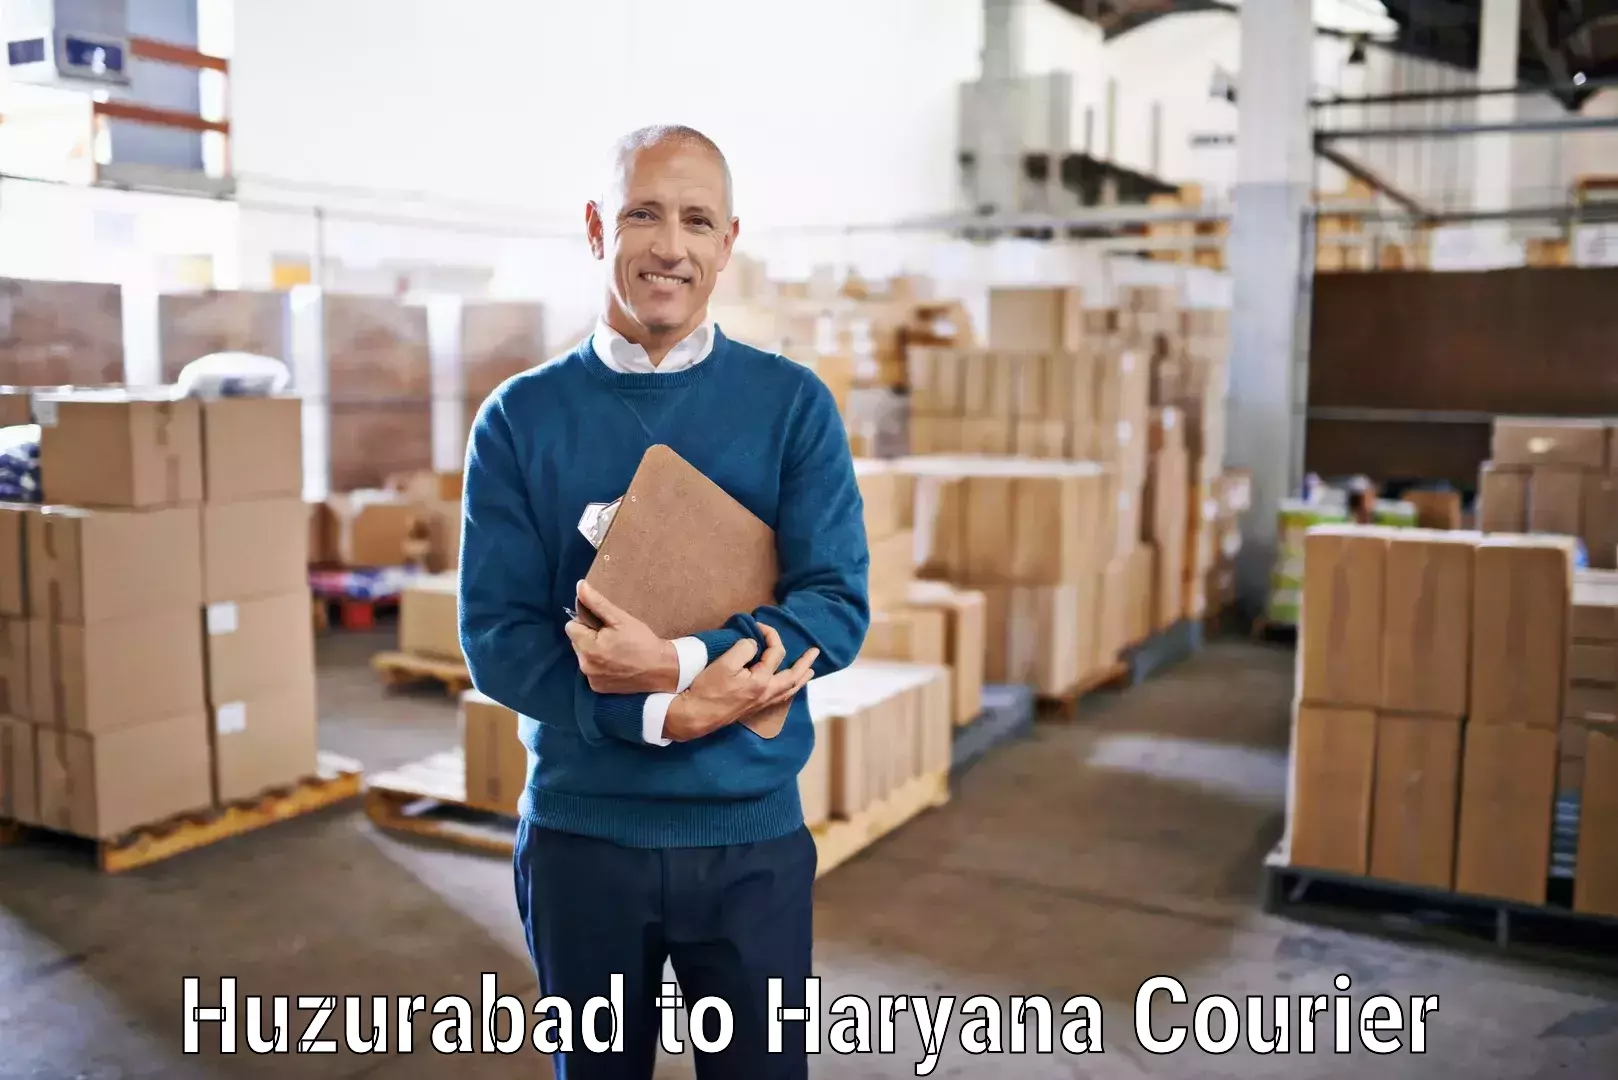 Reliable freight solutions in Huzurabad to Jhajjar